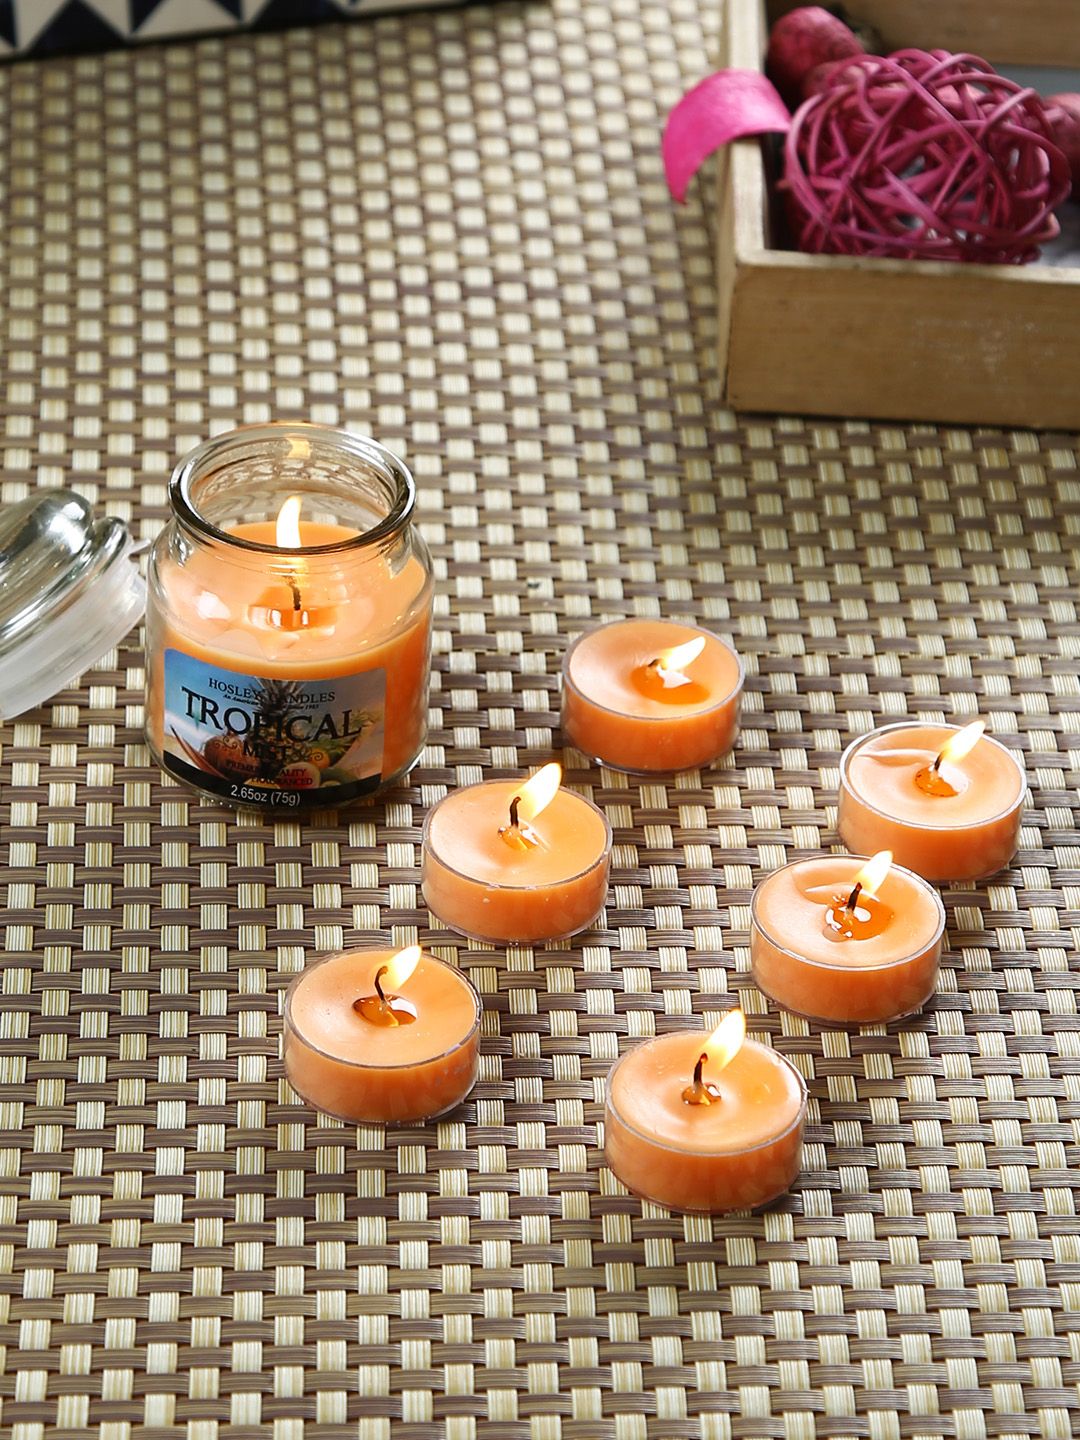 HOSLEY Set of 7 Orange Tropical Mist Scented Jar Candle With Tealights Price in India